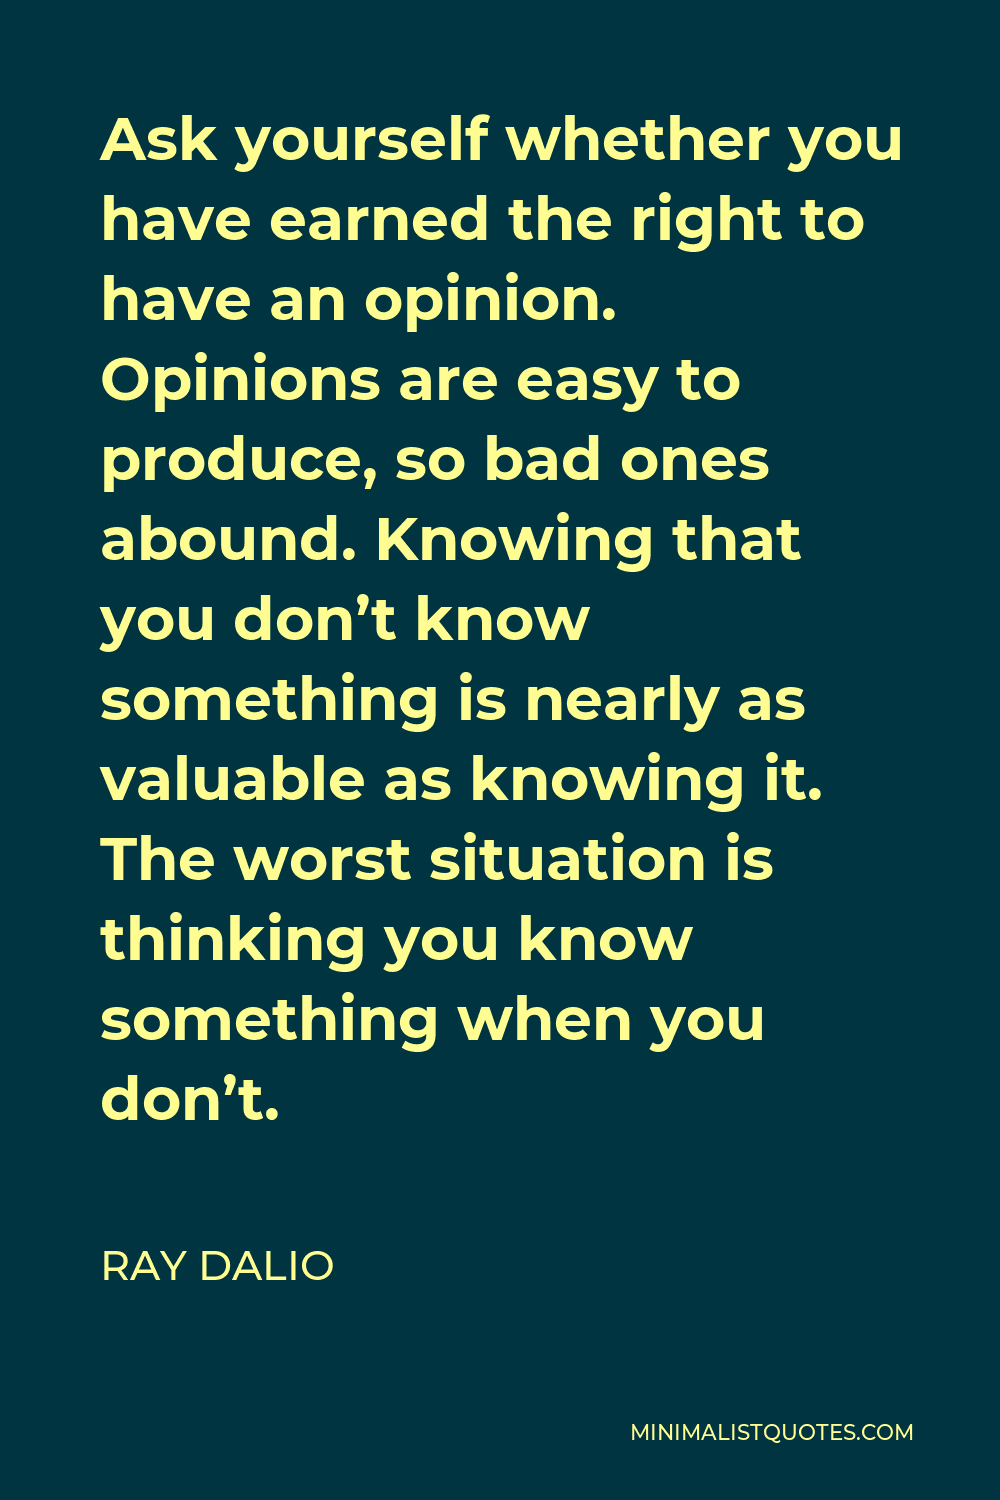 Ray Dalio Quote - Ask yourself whether you have earned the right to have an opinion. Opinions are easy to produce, so bad ones abound. Knowing that you don’t know something is nearly as valuable as knowing it. The worst situation is thinking you know something when you don’t.